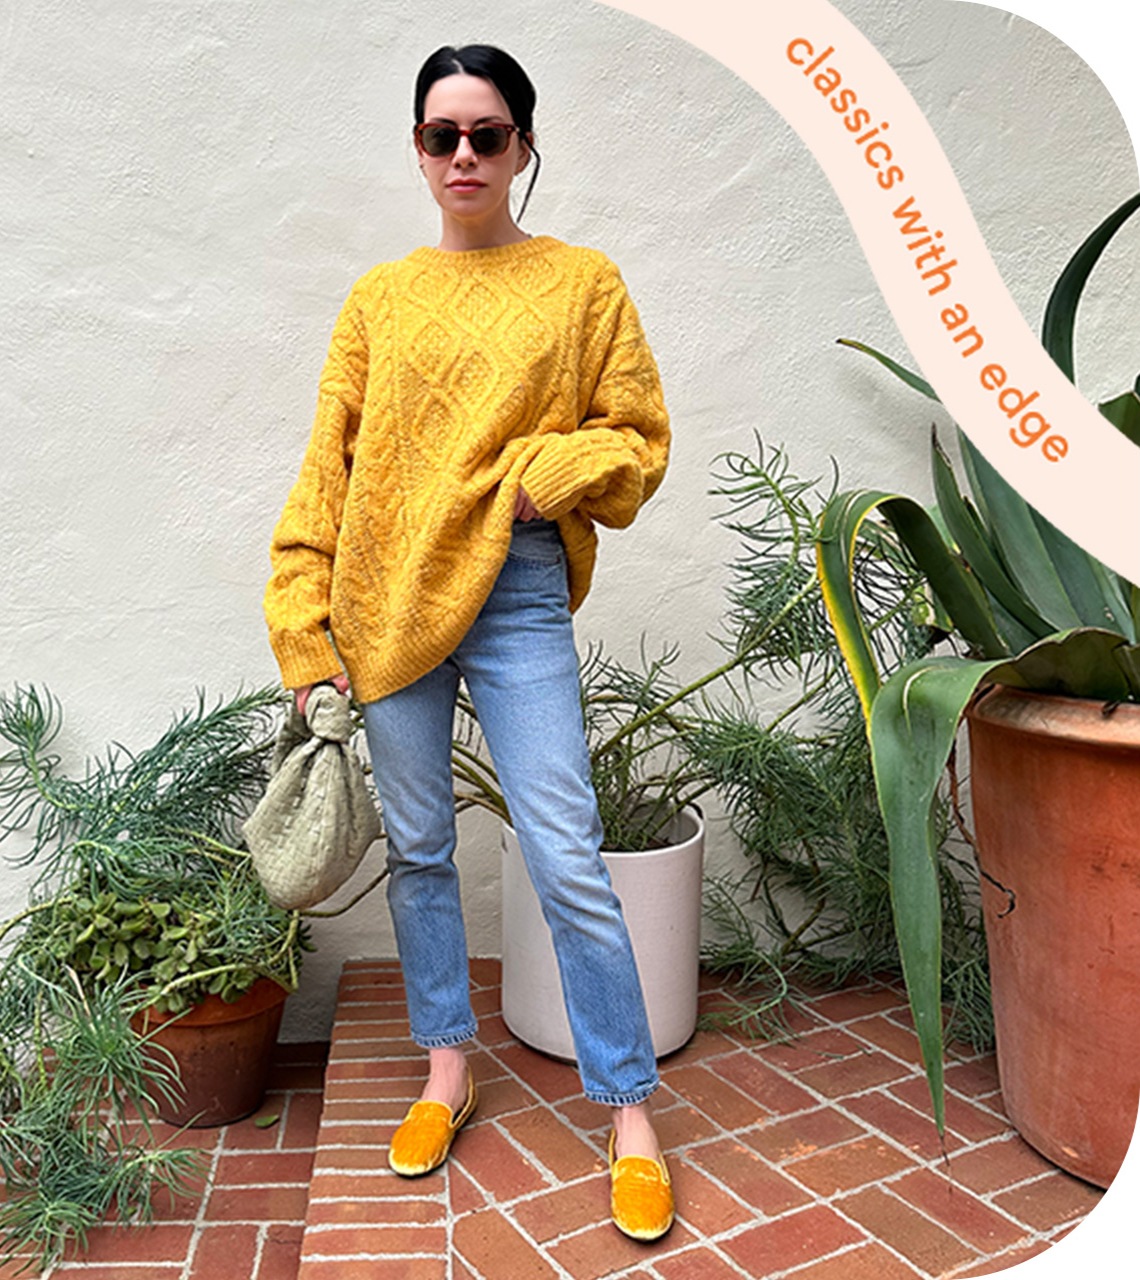 brit wearing yellow sweater and matching loafers